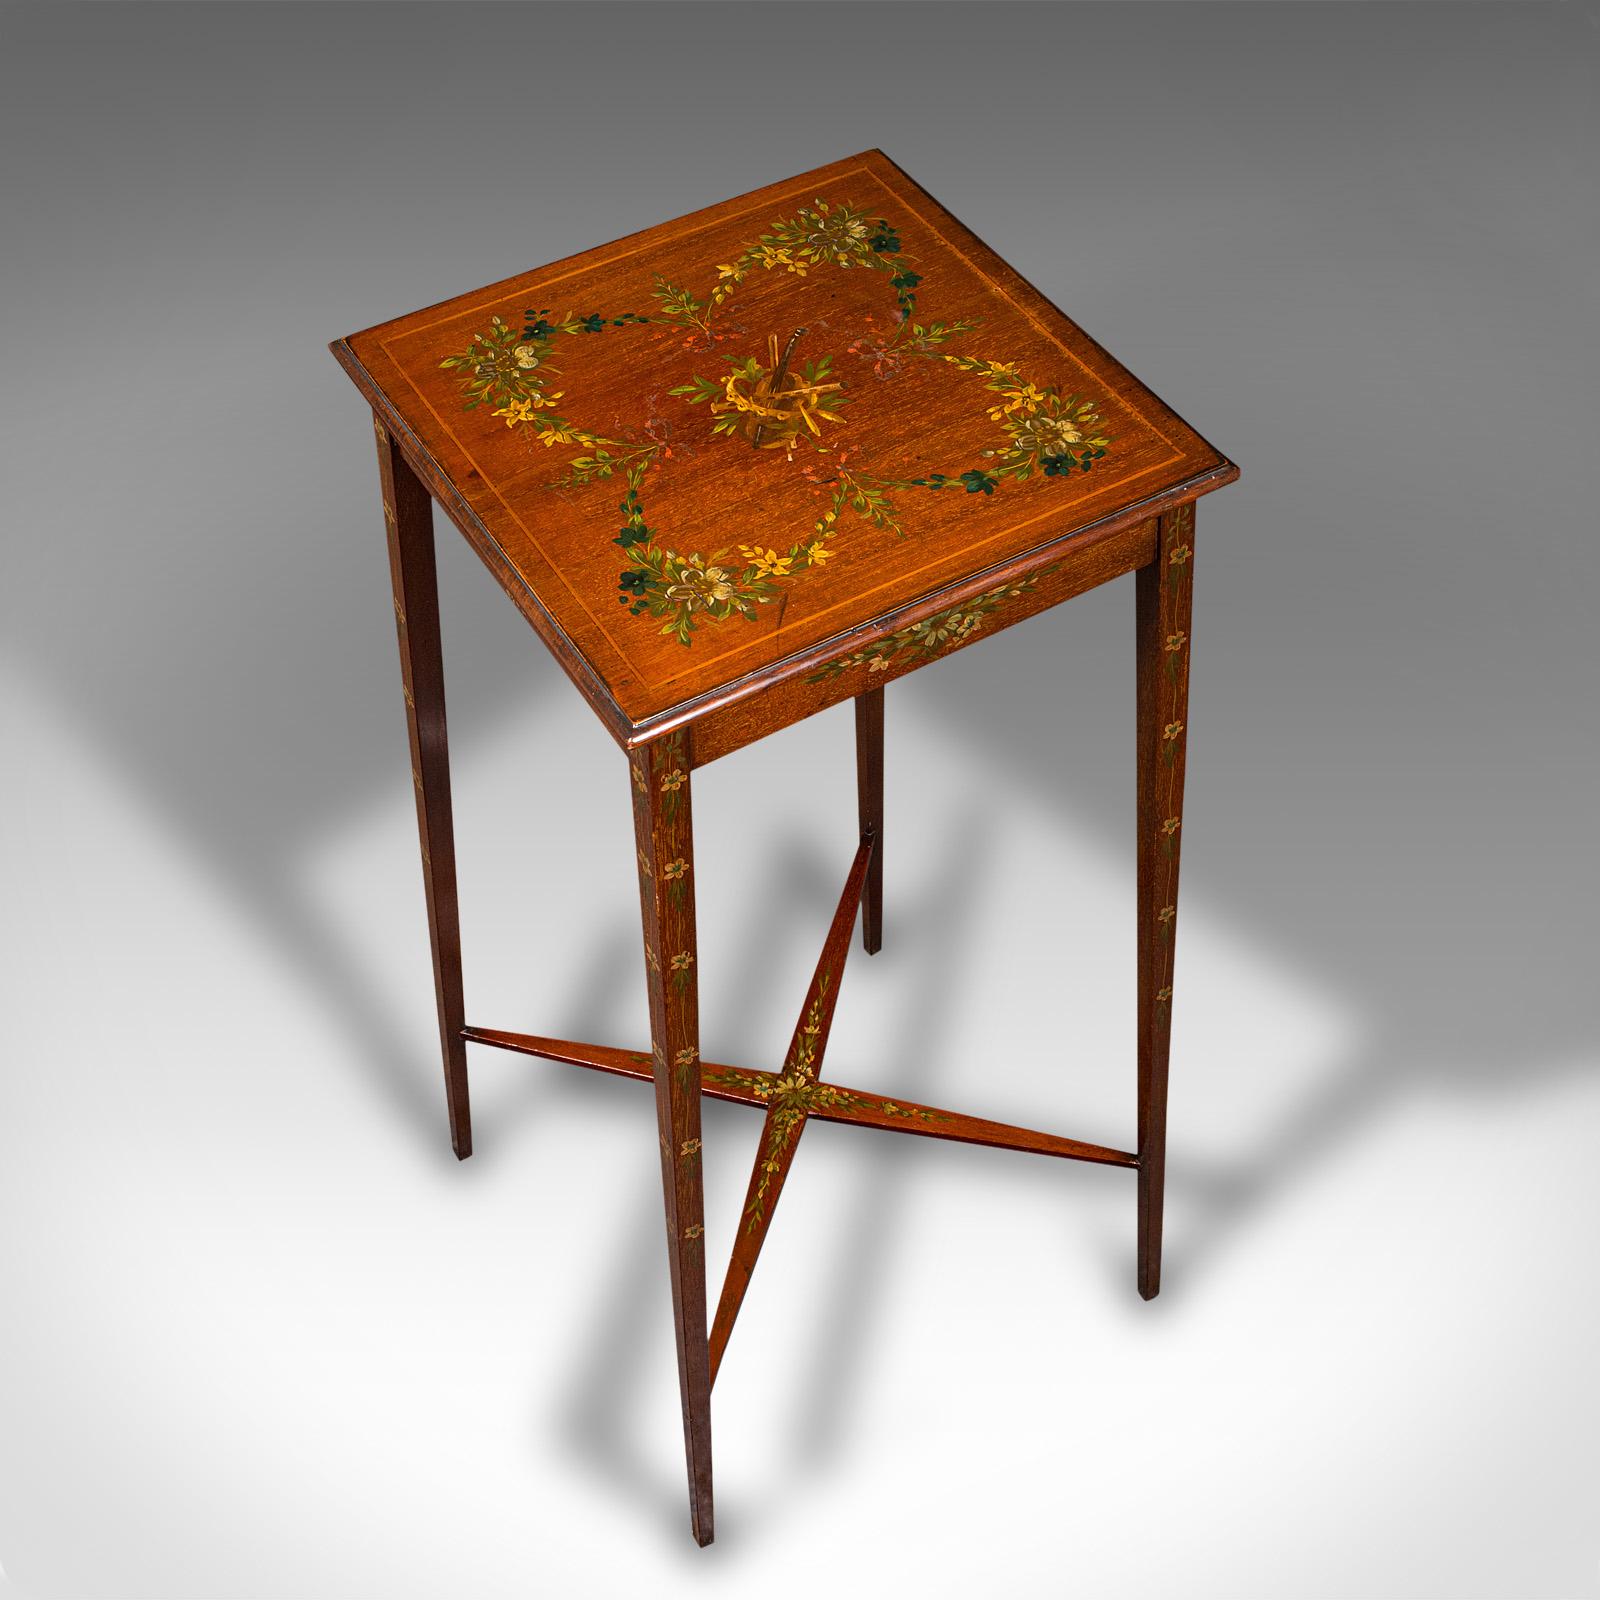 Wood Small Antique Lamp Table, English, Occasional, Hand Painted Decor, Regency, 1820 For Sale